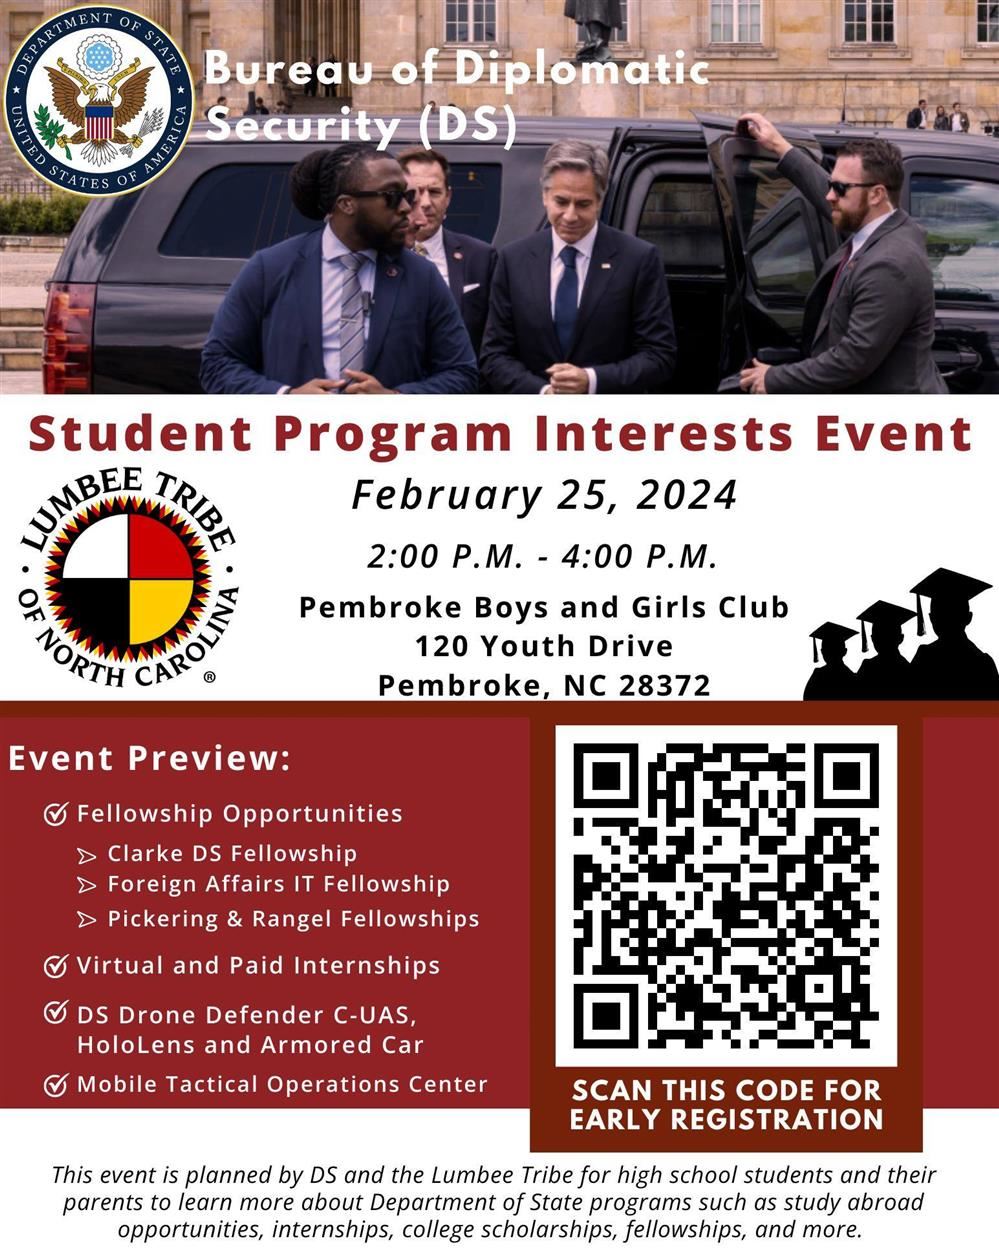 The Bureau of Diplomatic Security (DS) and the Lumbee Tribe of NC is hosting a Student Program Interest Event on February 25,